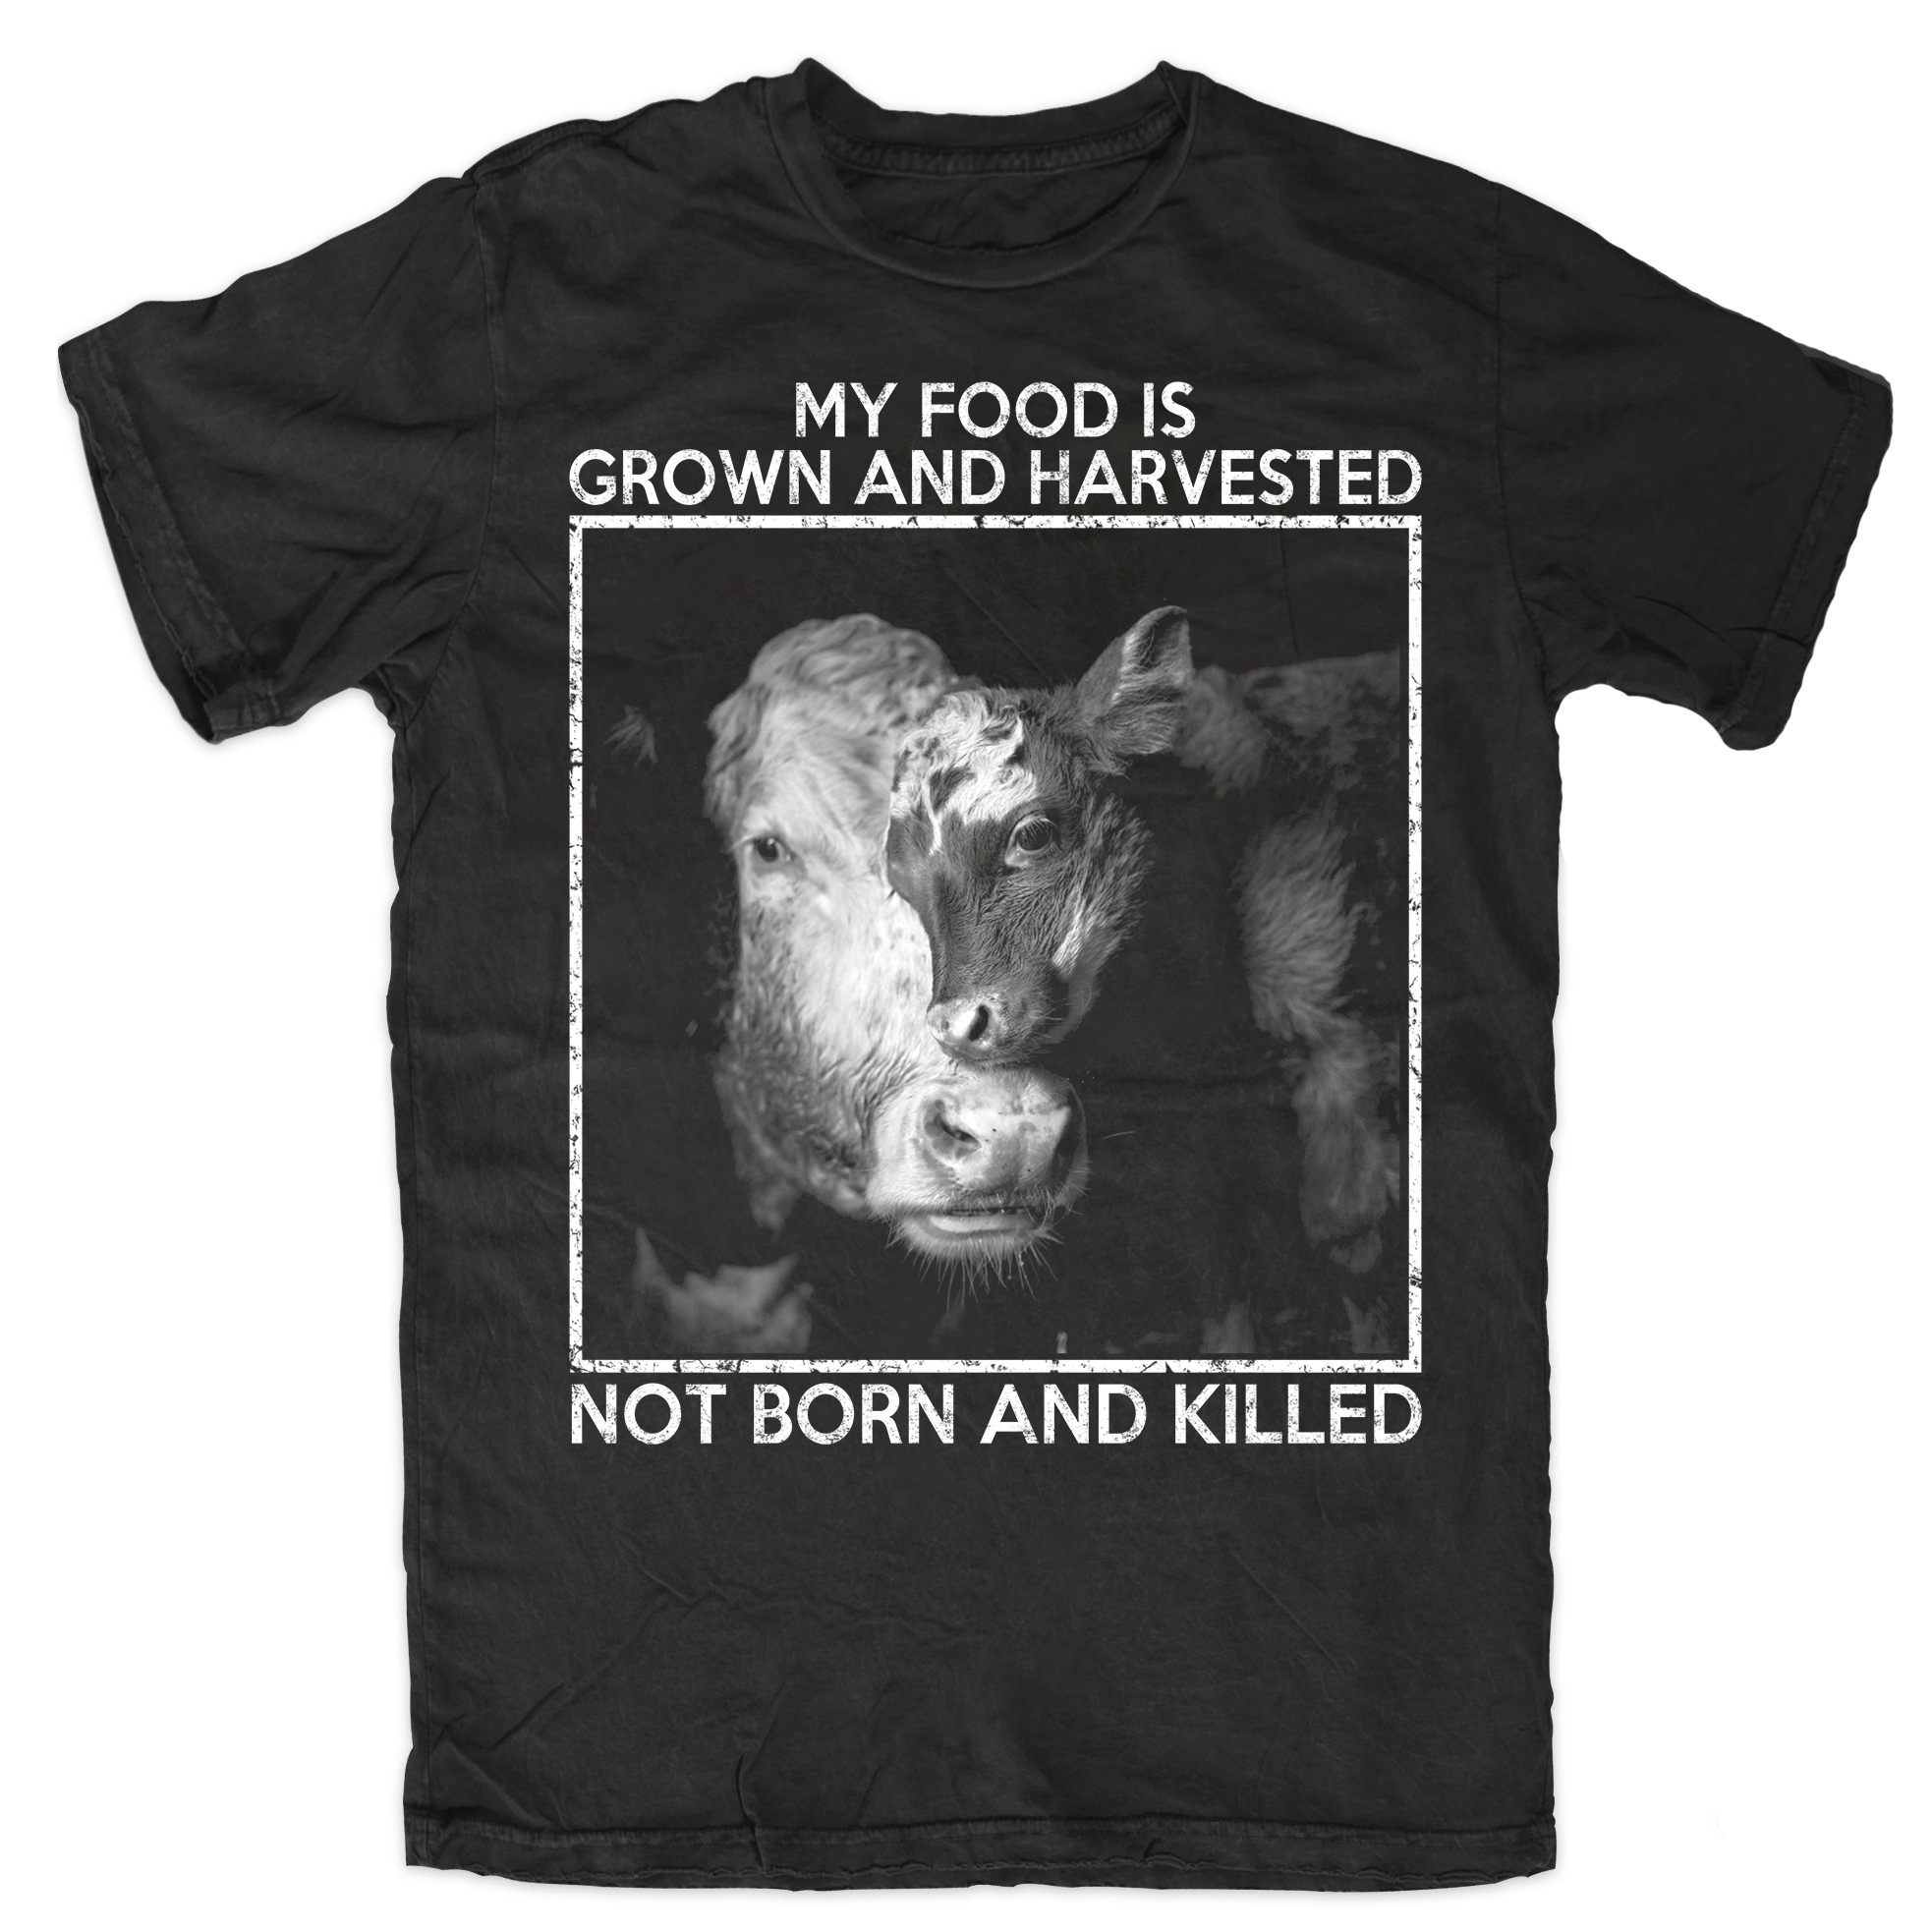 My food is grown and harvested not born and killed - Cow lover